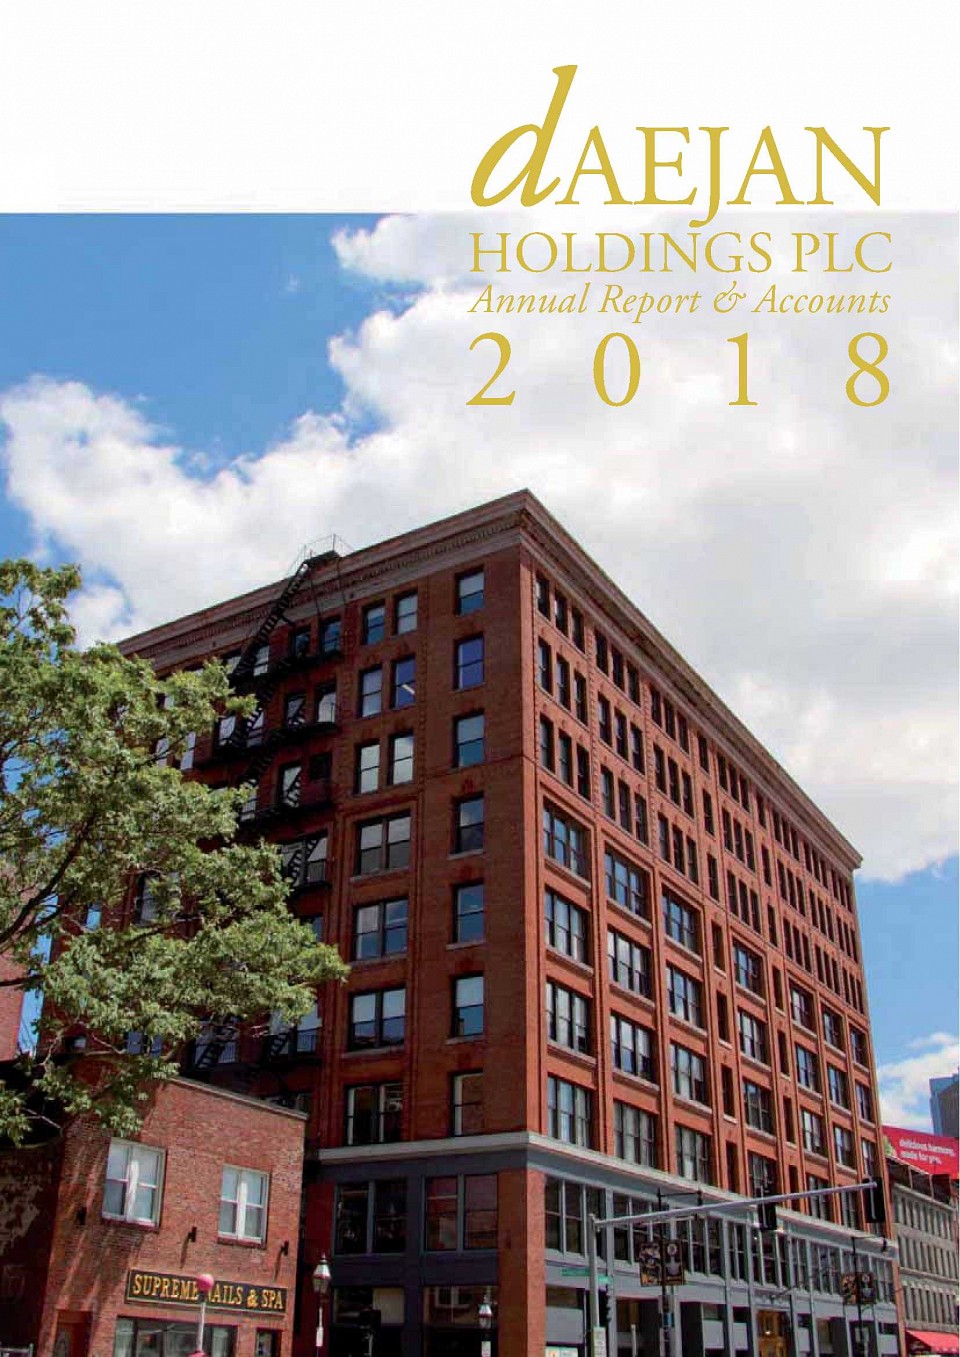 View our Annual Report & Accounts 2018